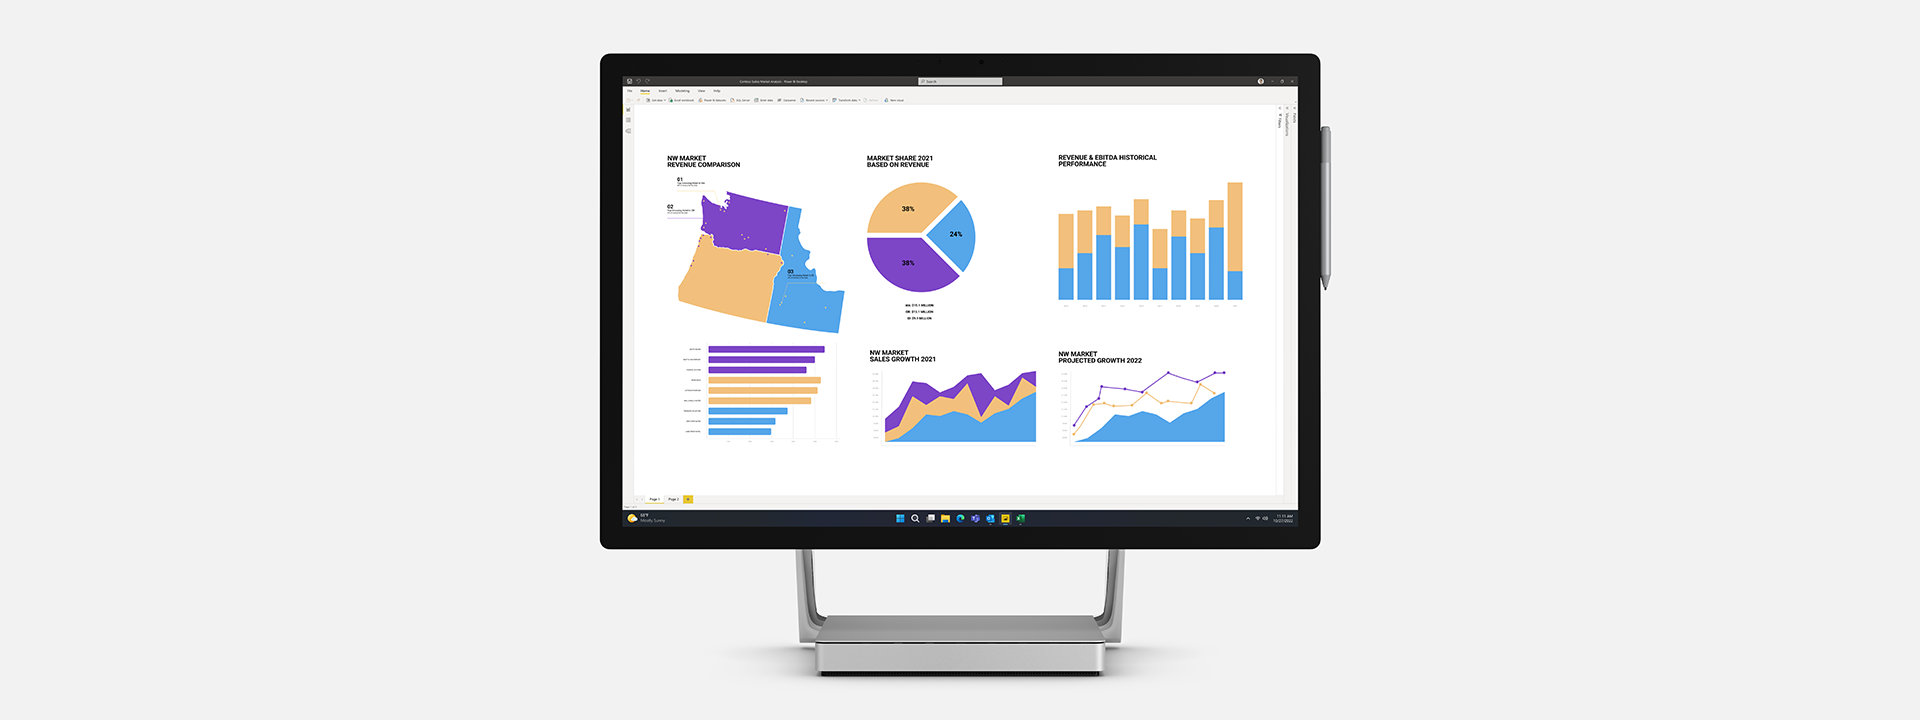 Surface Studio 2+ for Business with Microsoft Power BI on the screen.